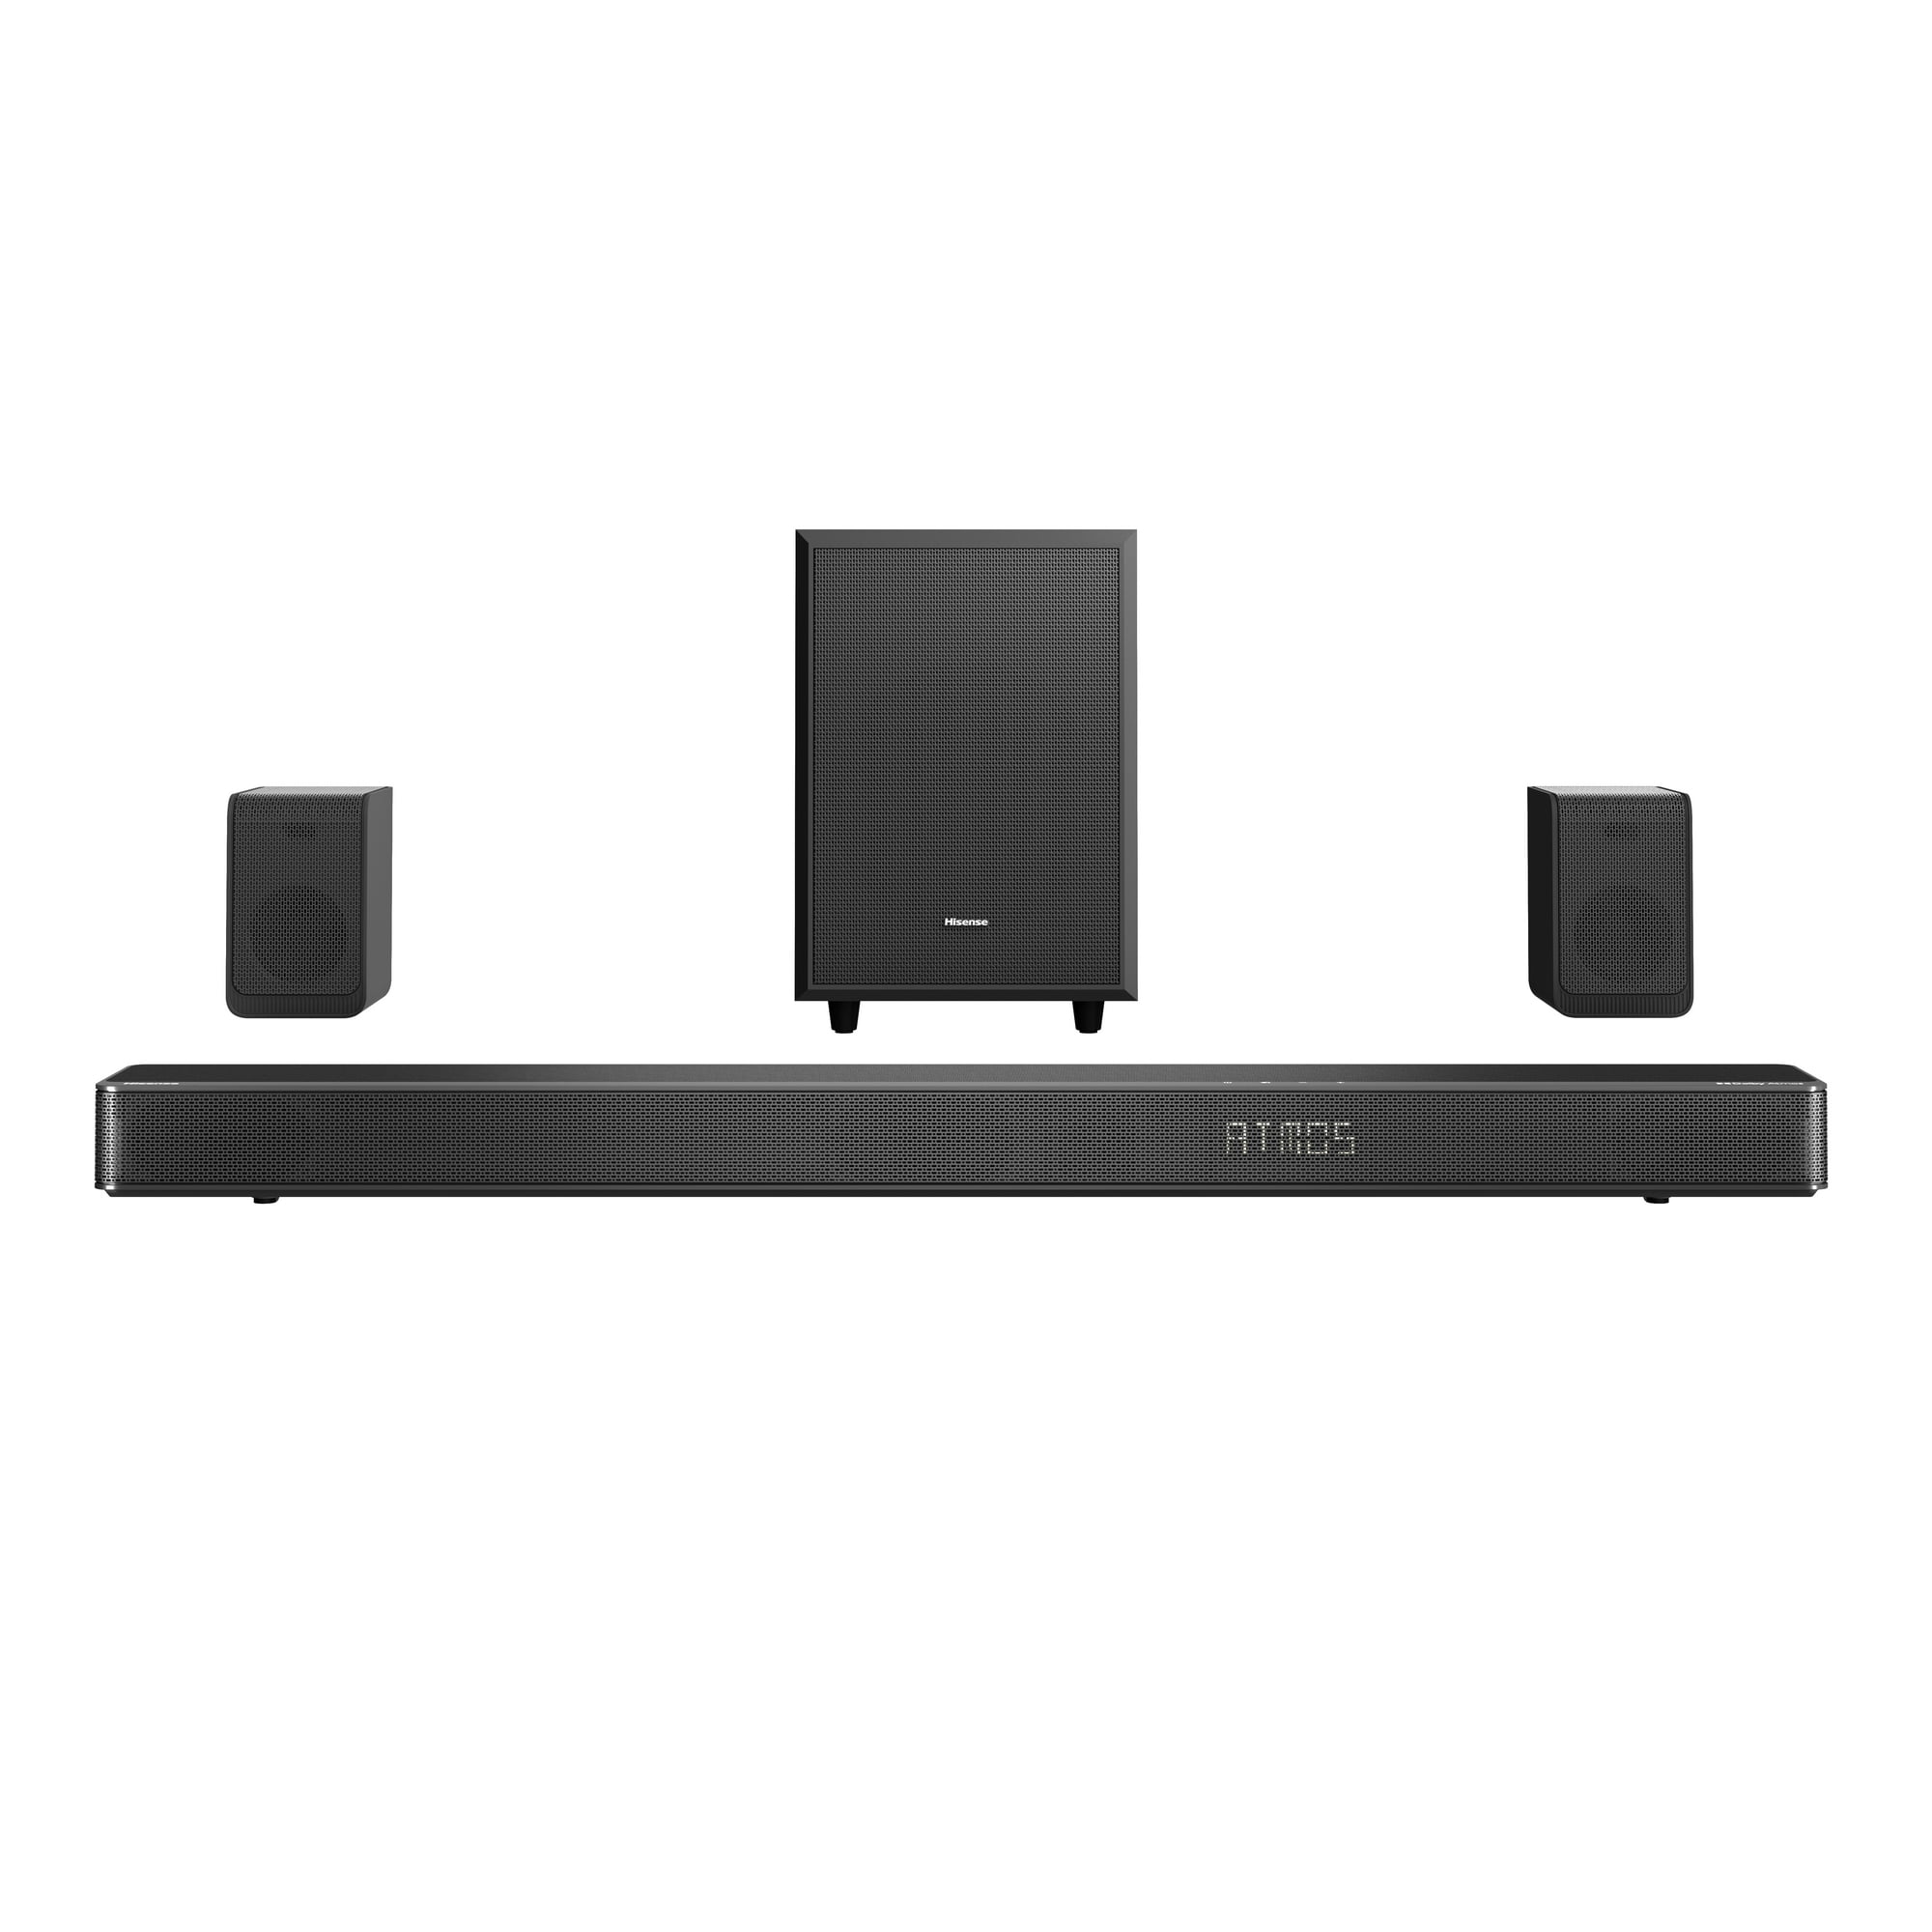 Hisense AX Series (AX5120G) 5.1.2 Ch 420W Soundbar with Wireless Subwoofer, Wireless Rear Speakers, and Dolby Atmos